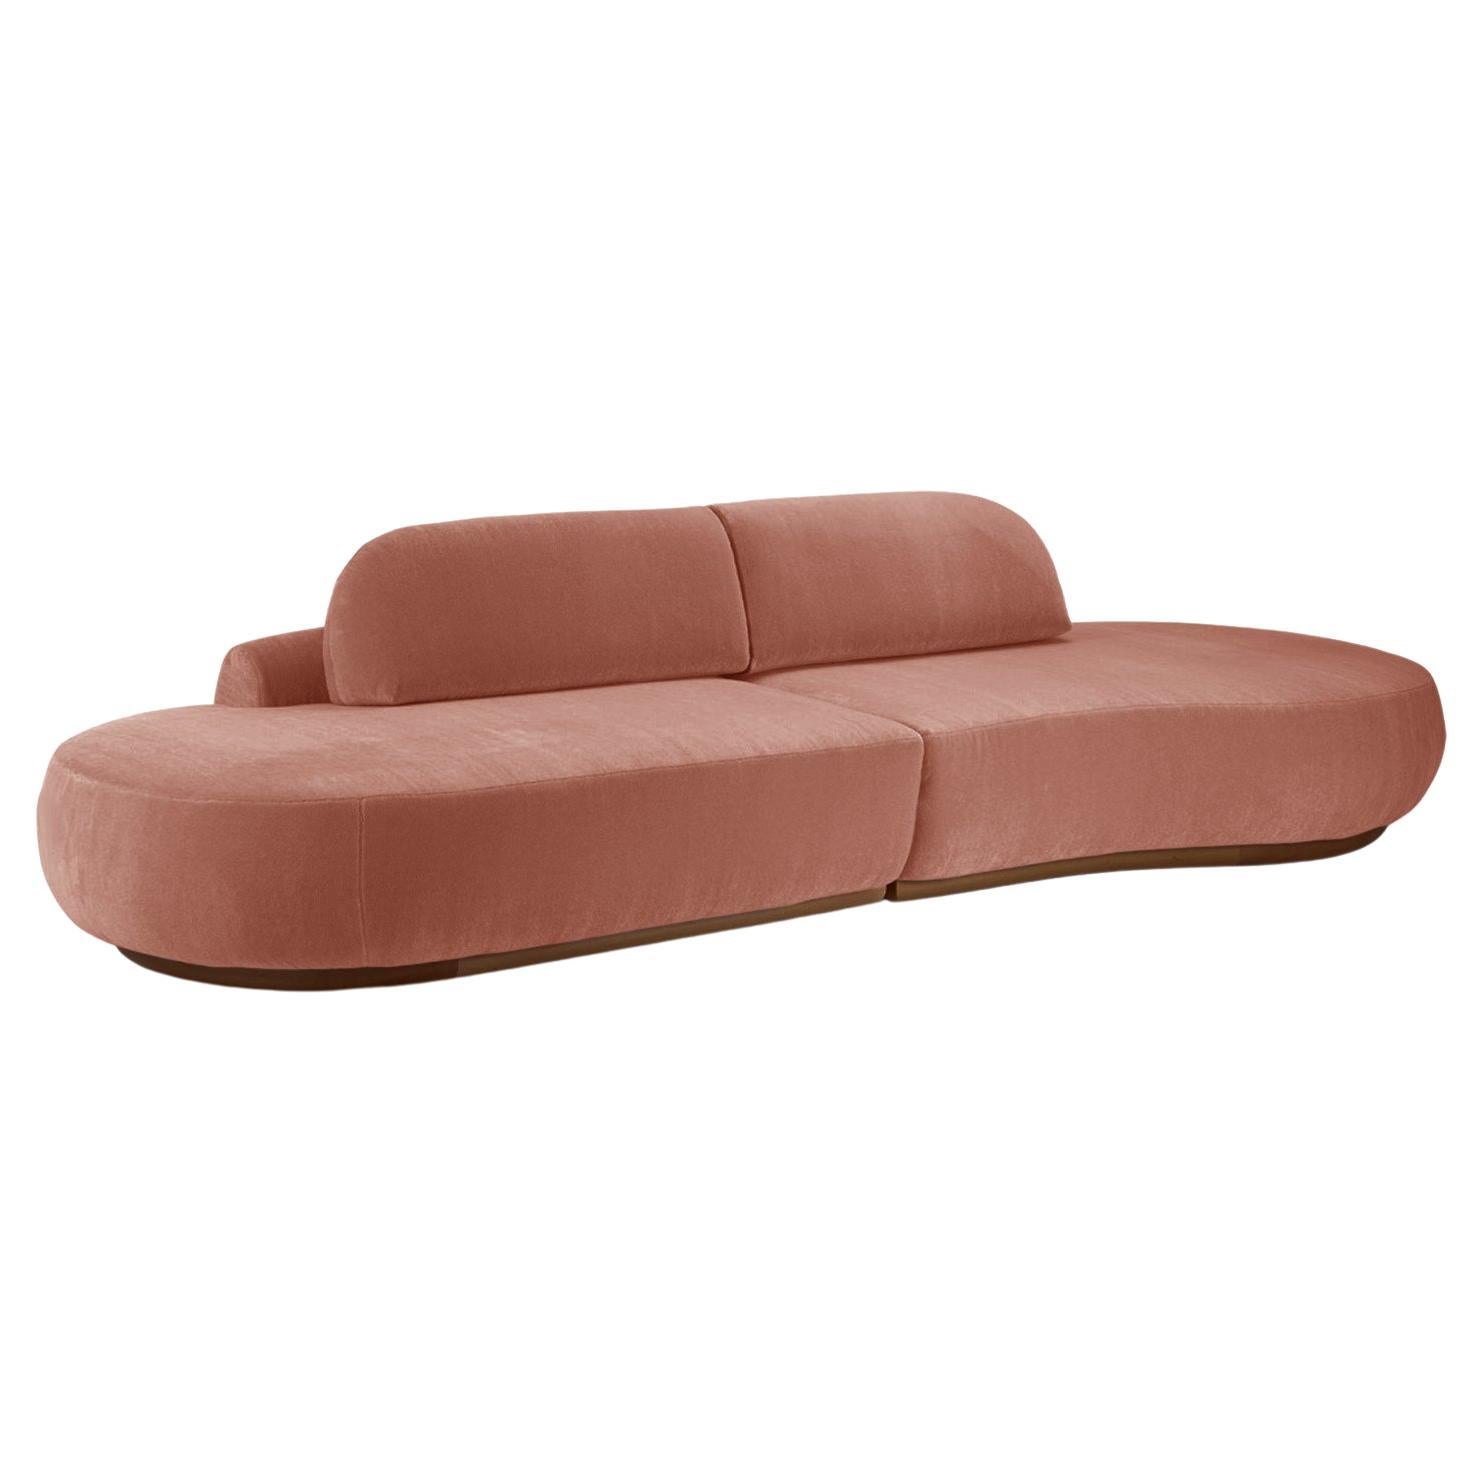 Naked Curved Sectional Sofa, 2 Piece with Beech Ash-056-1 and Paris Brick